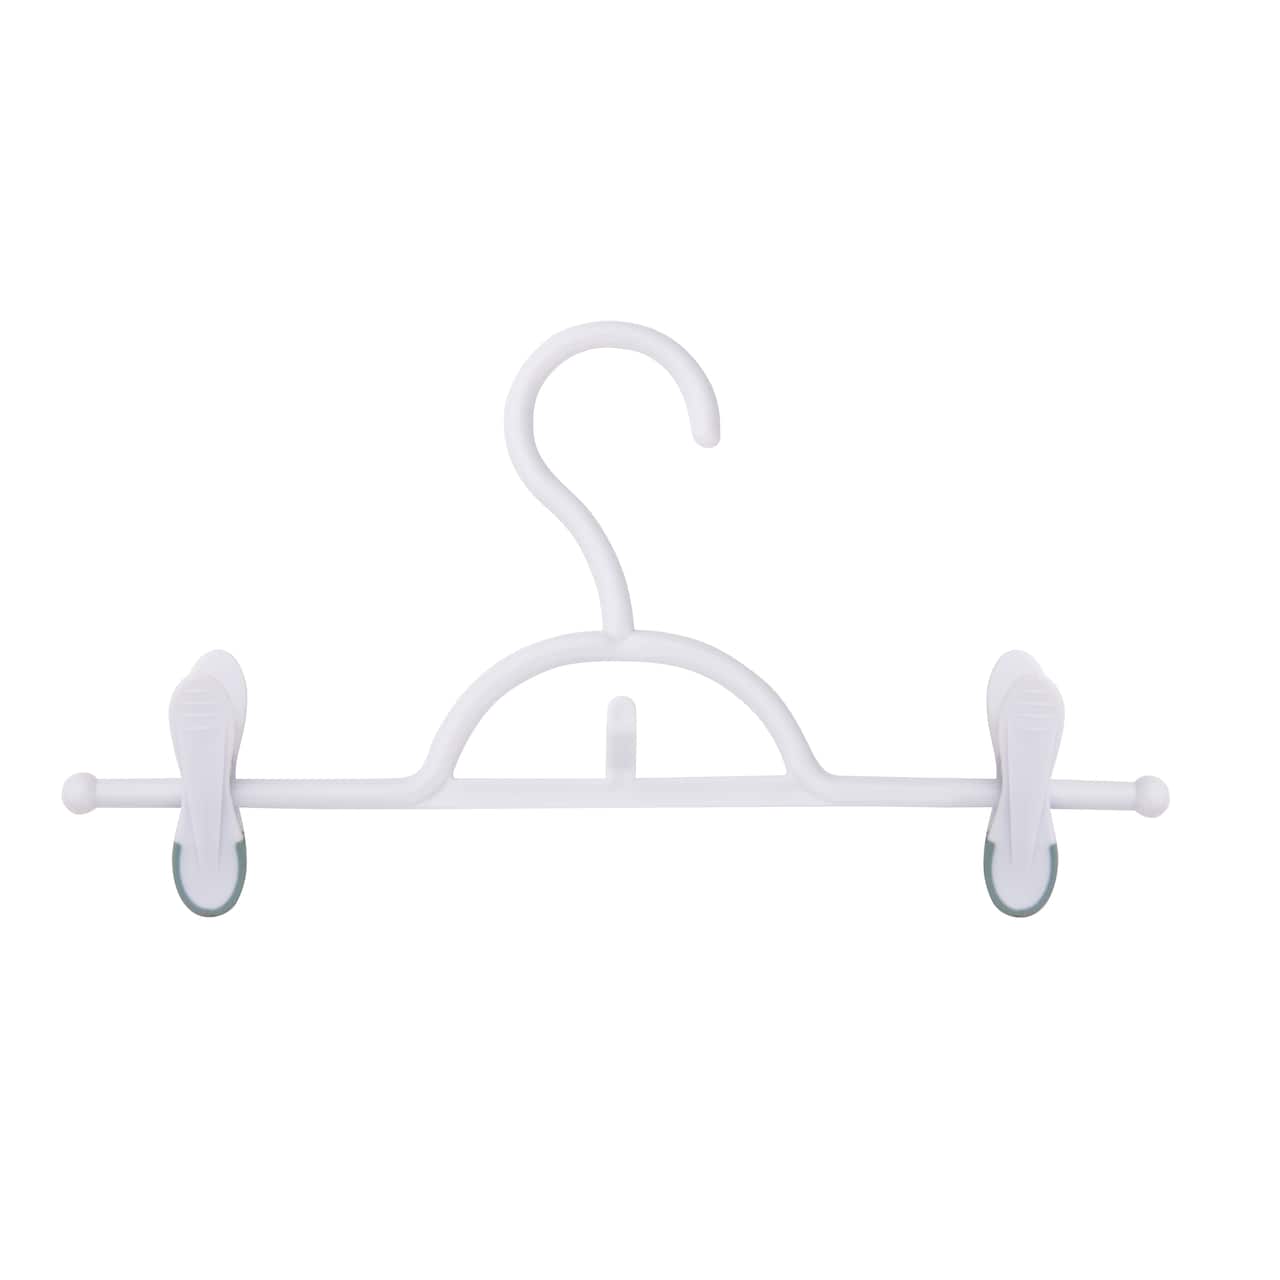 Honey Can Do White Soft Touch Pant Hangers, 12ct.